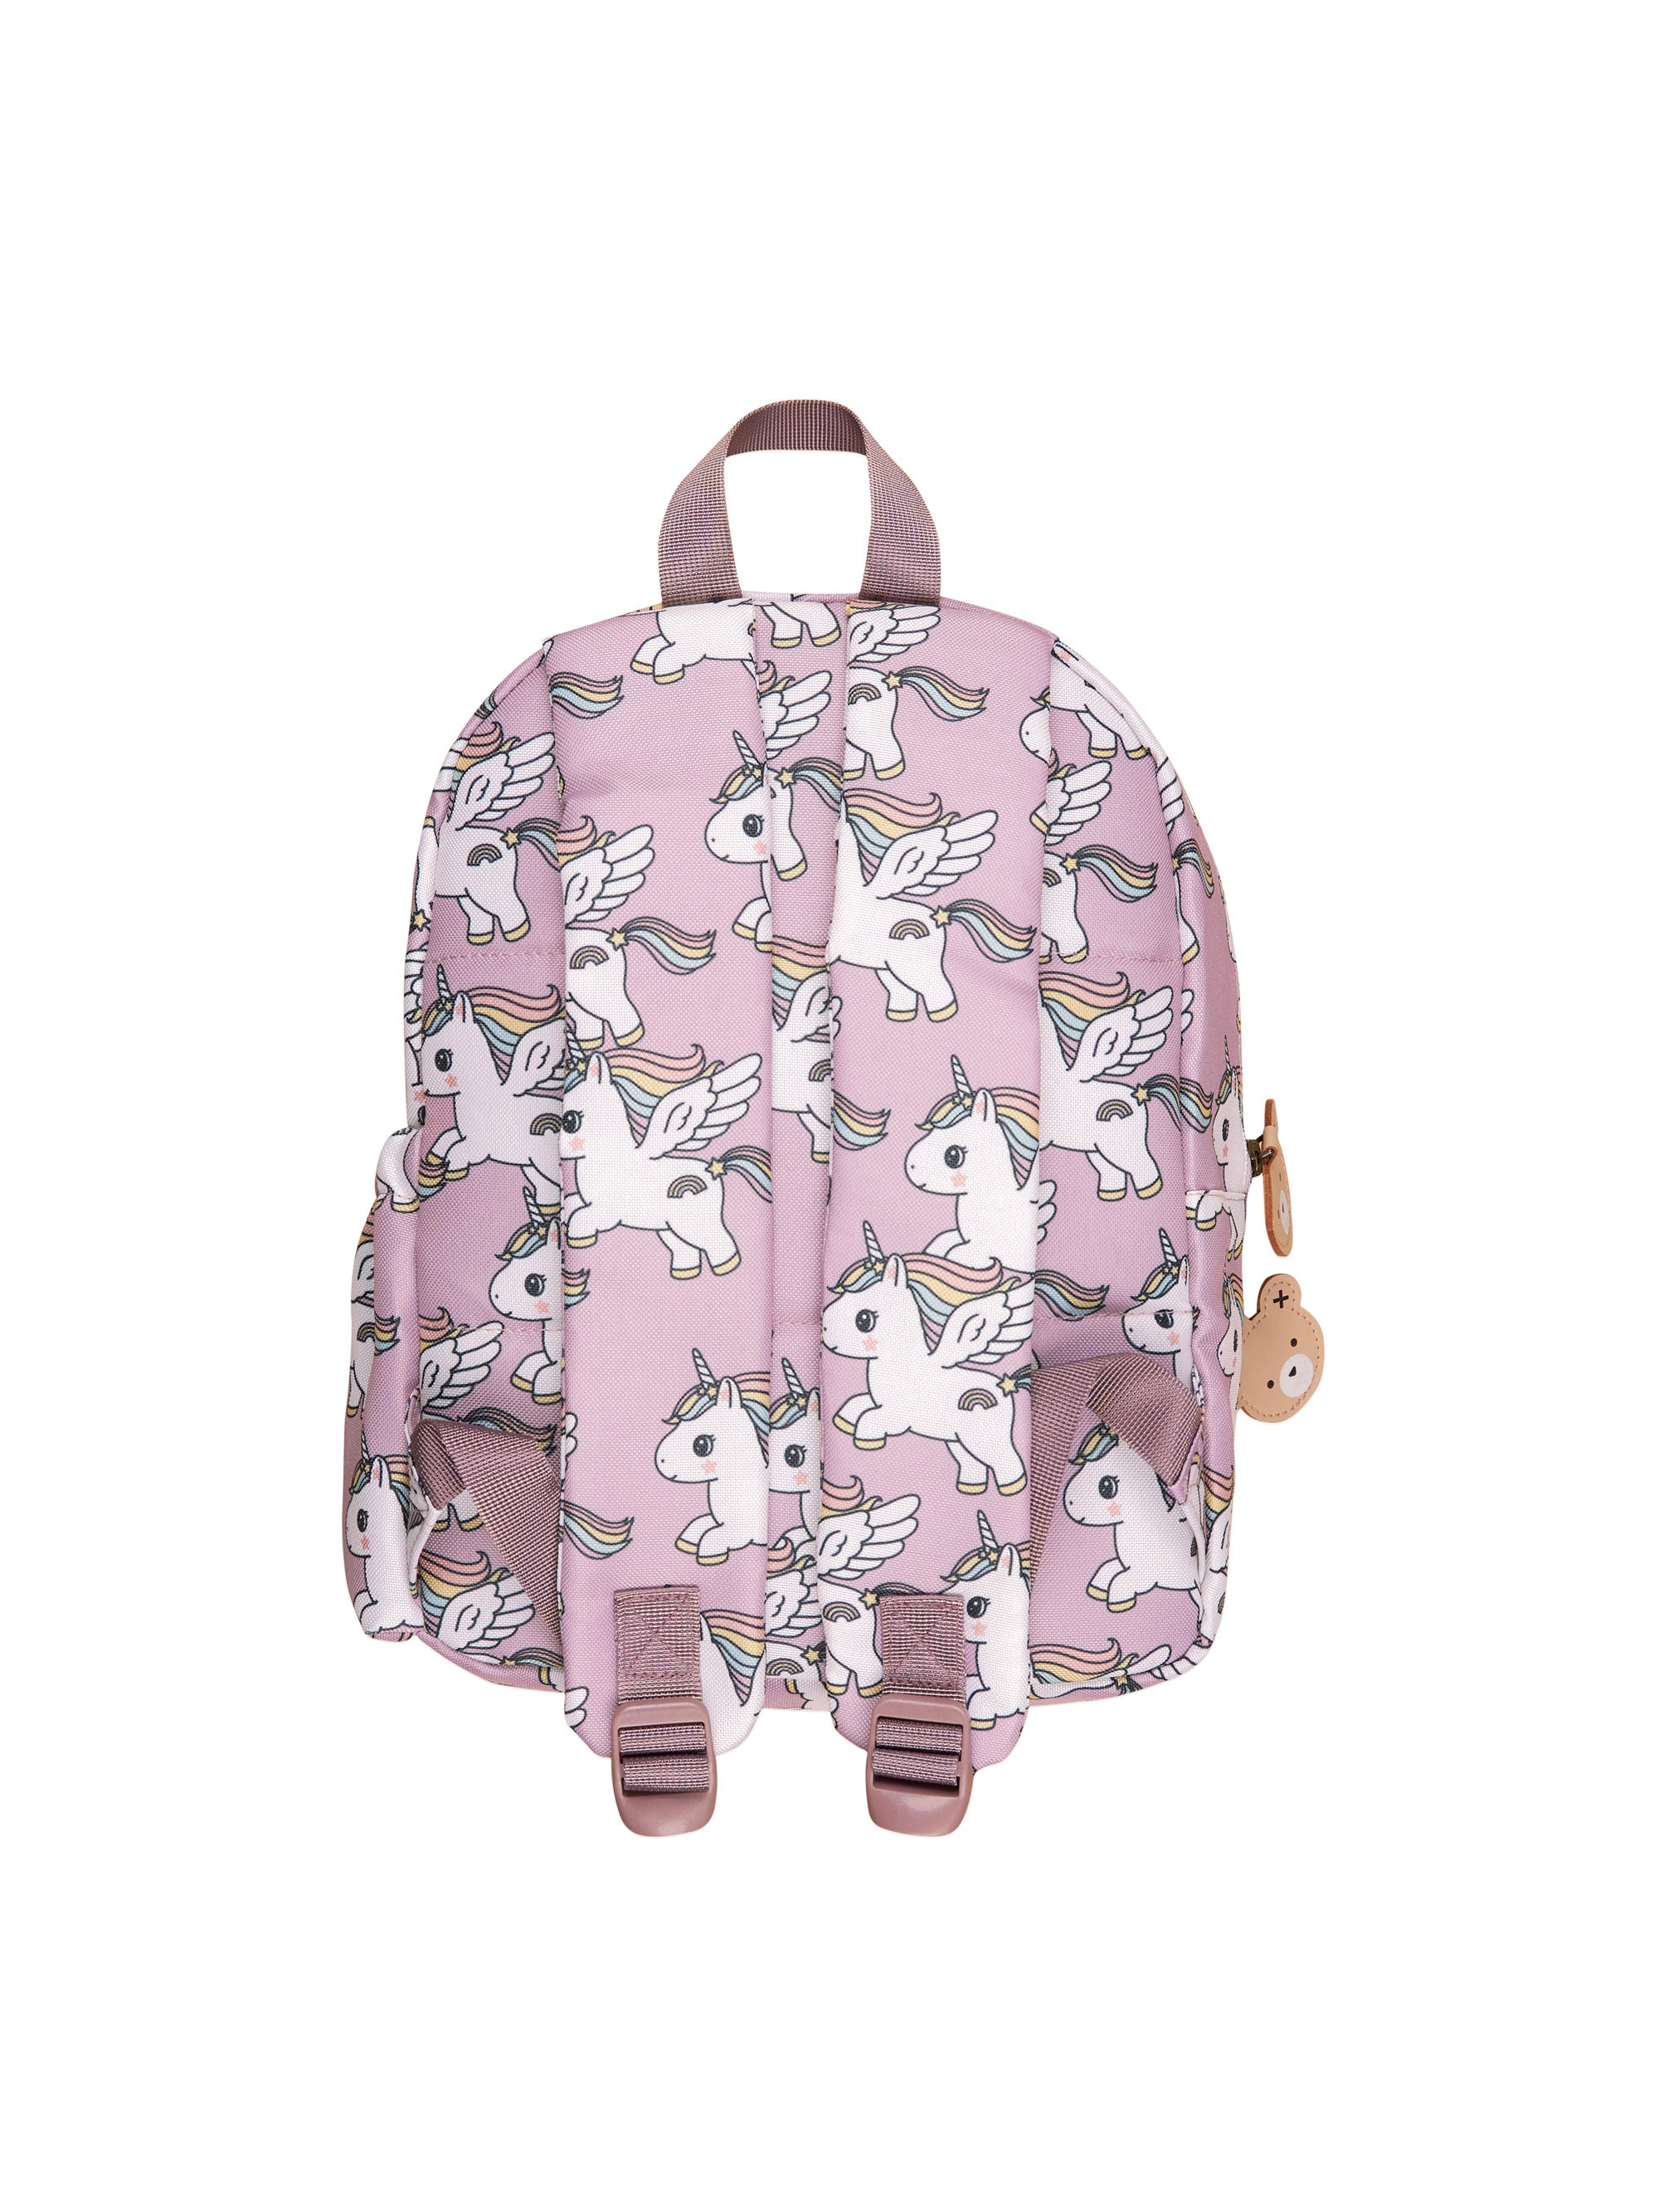 Huxbaby Magical Unicorn Backpack - Orchid